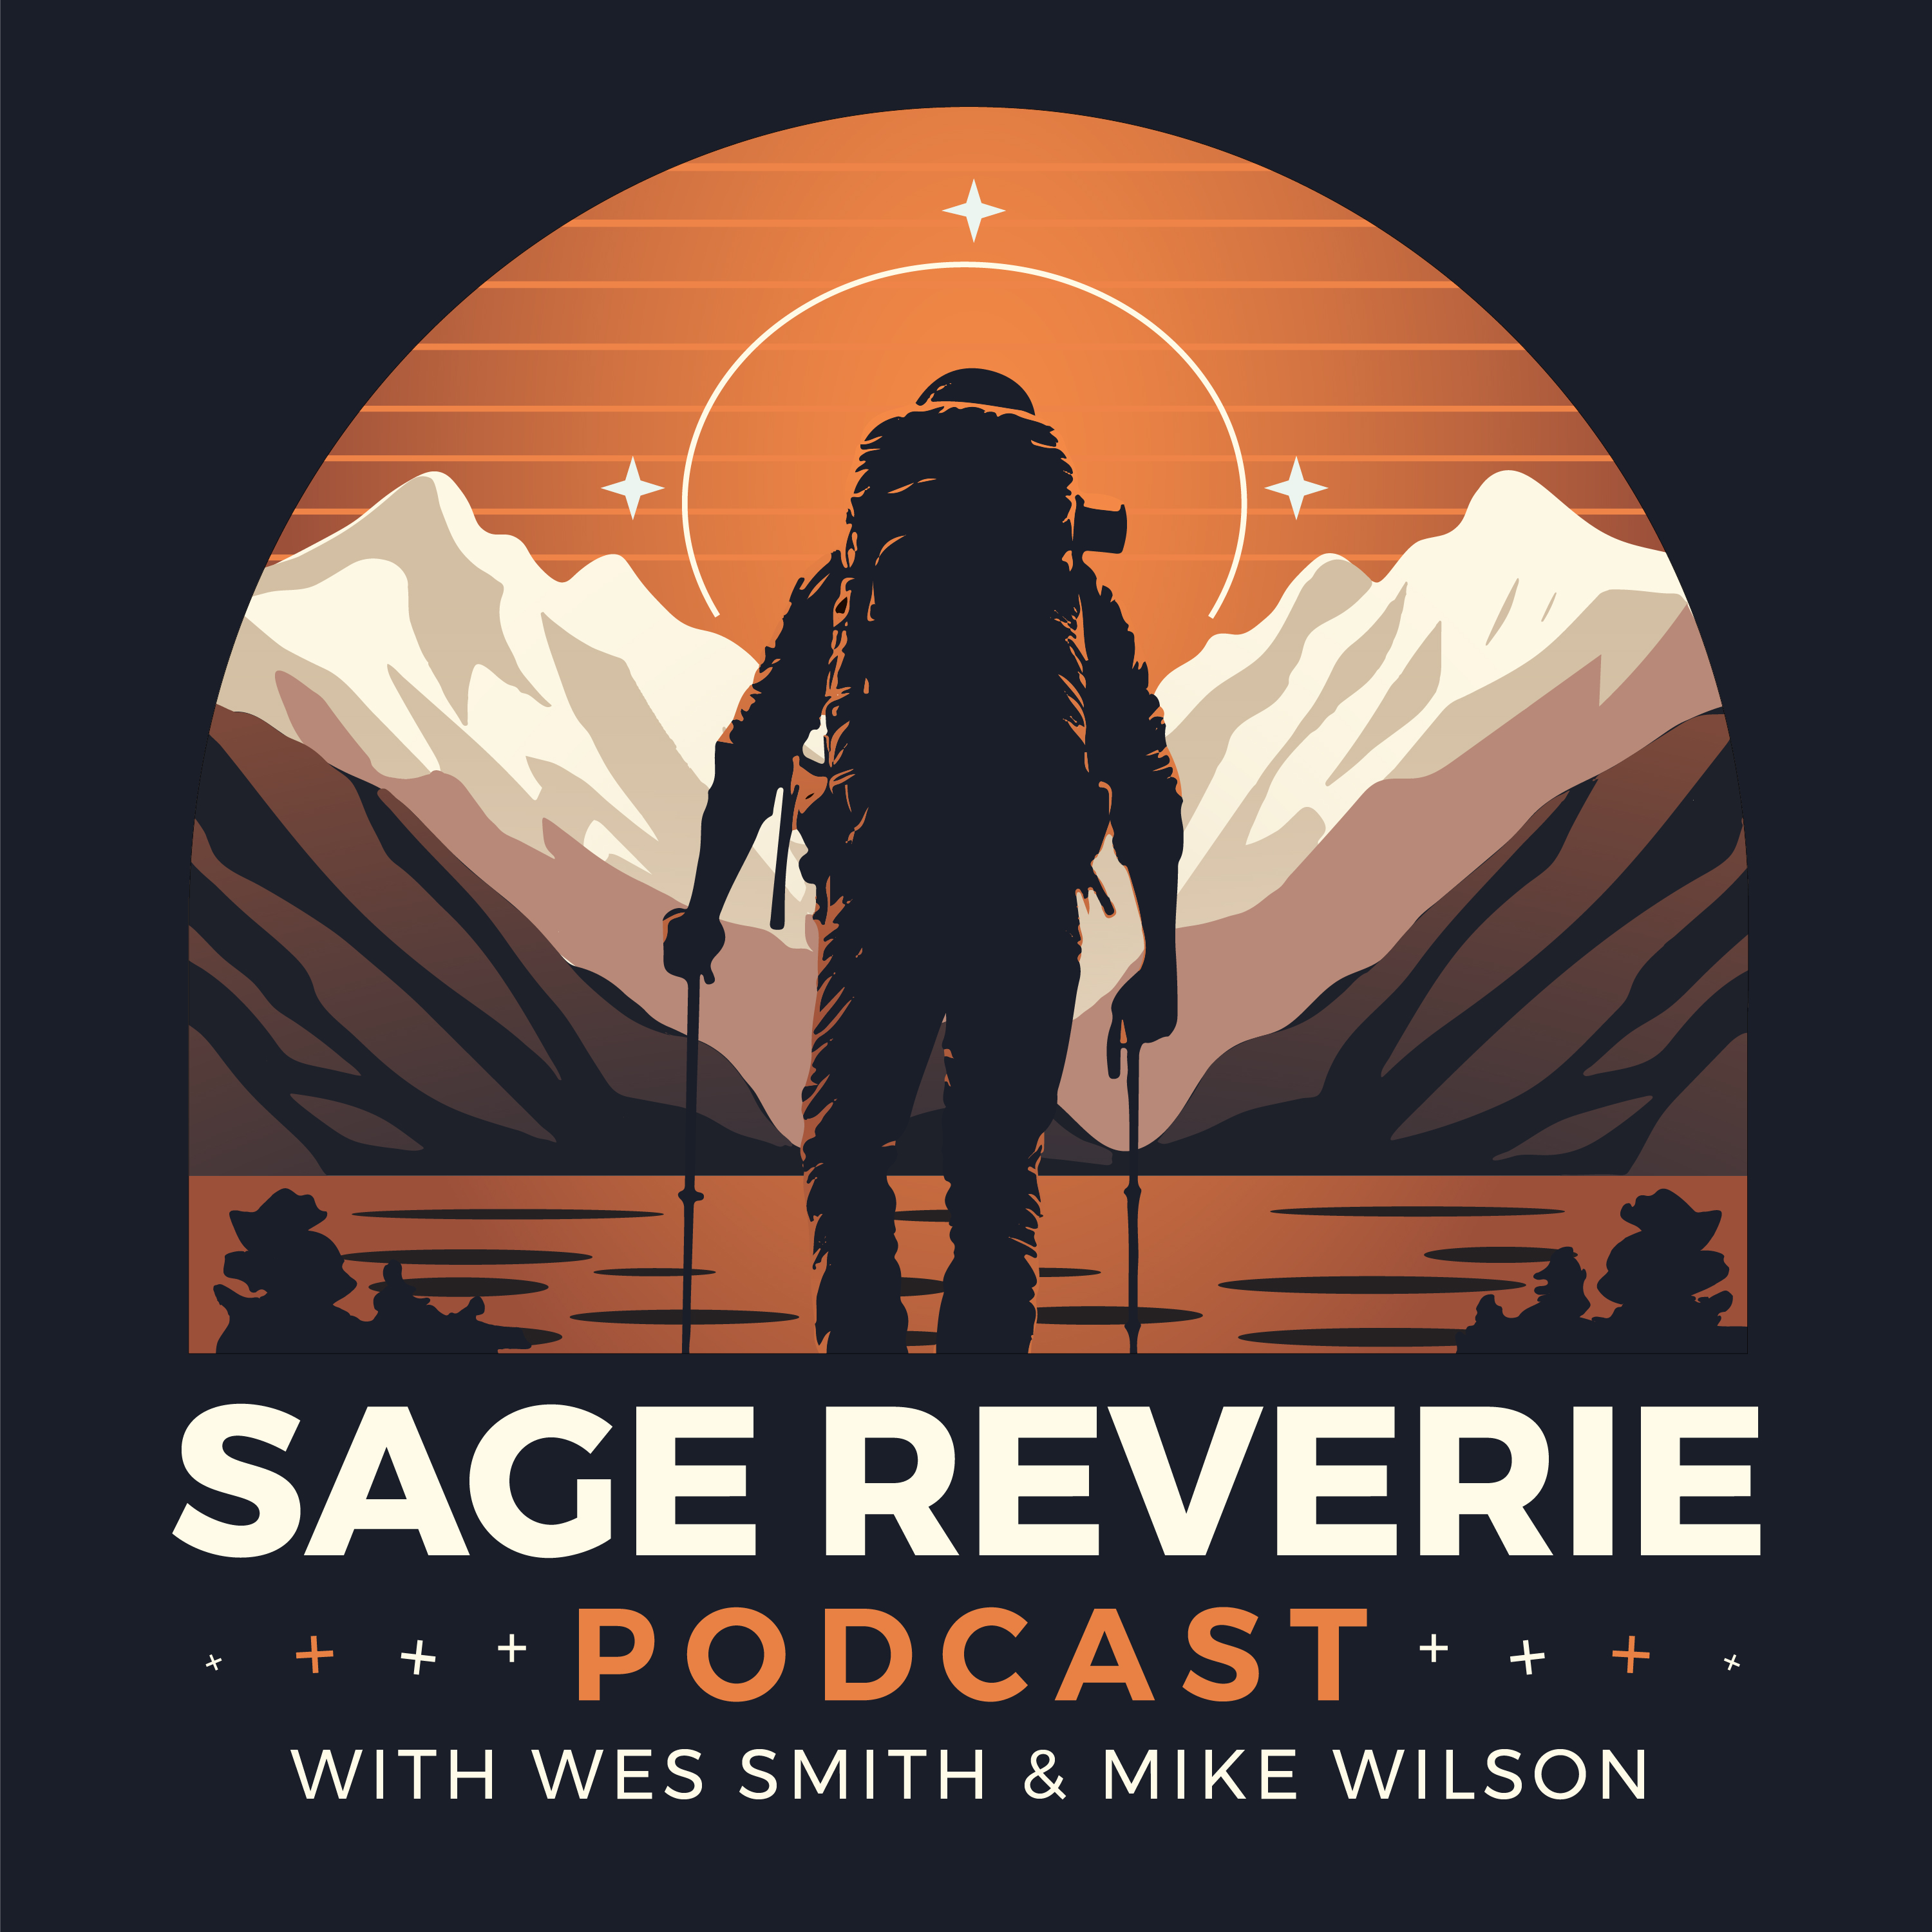  The Immigration Dilemma: Navigating Compassion & Conviction  | Sage Reverie Podcast Ep. 7